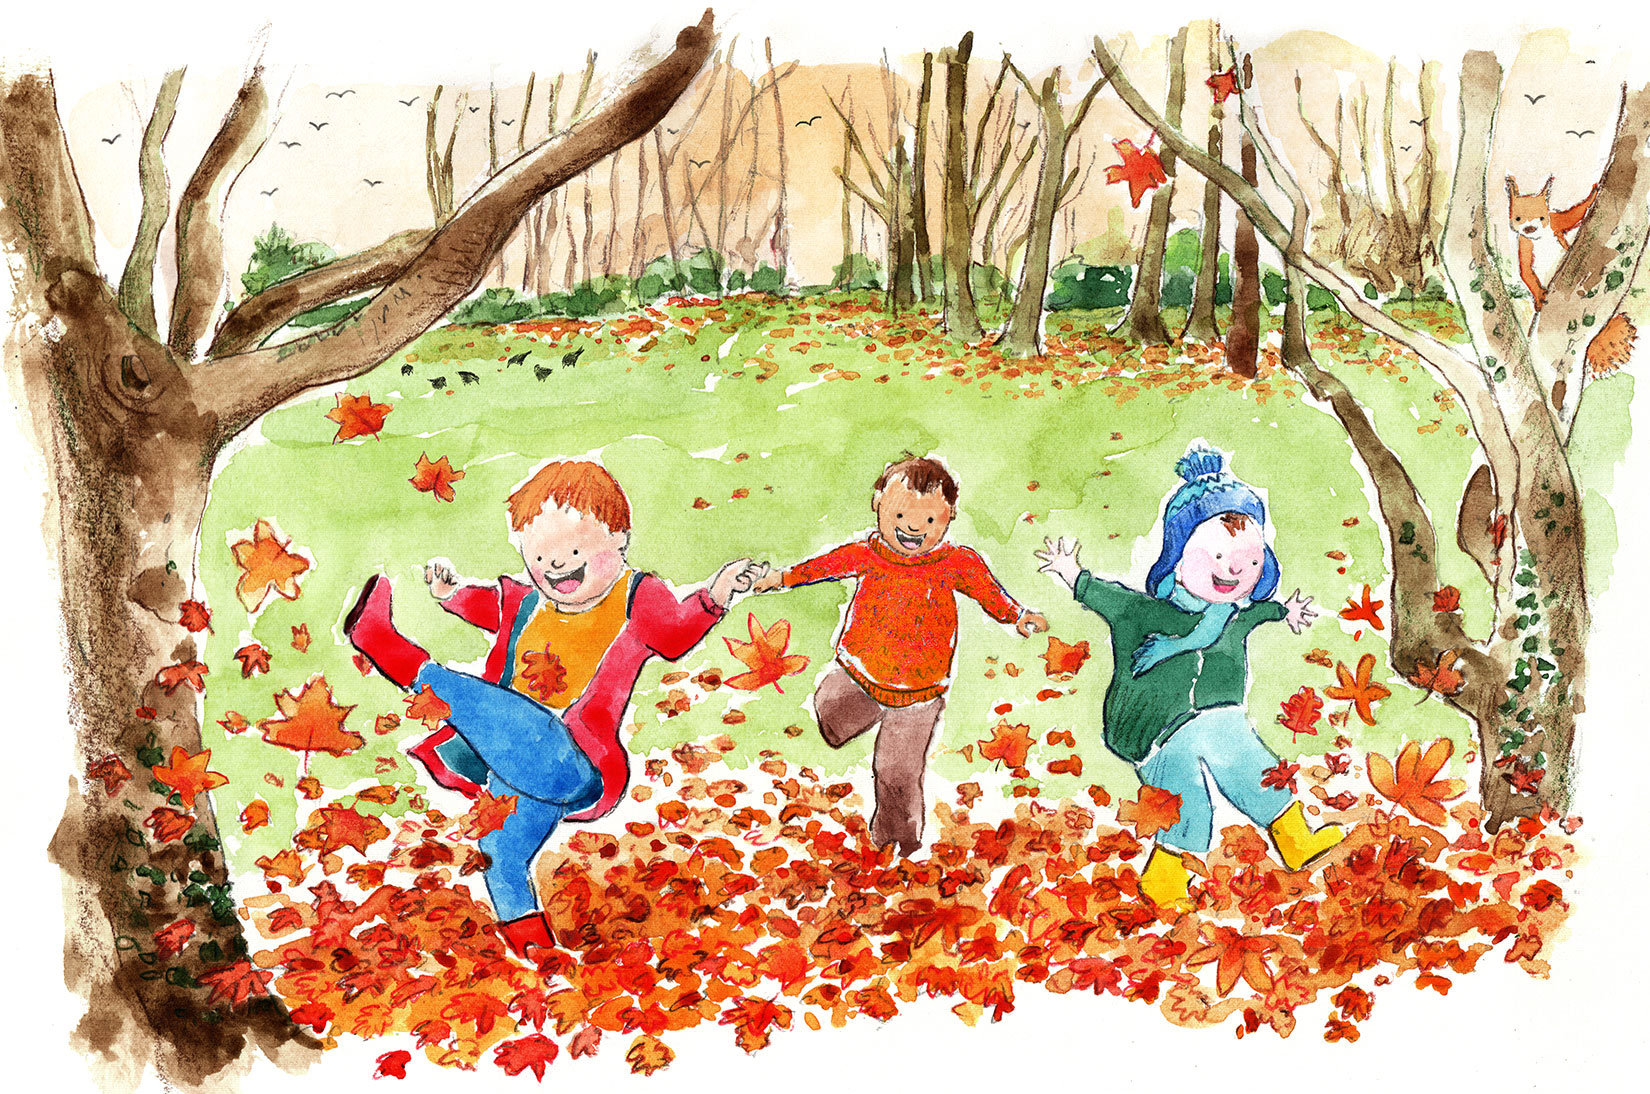 Three boys are running through autumn leaves in the park and kicking them in the air